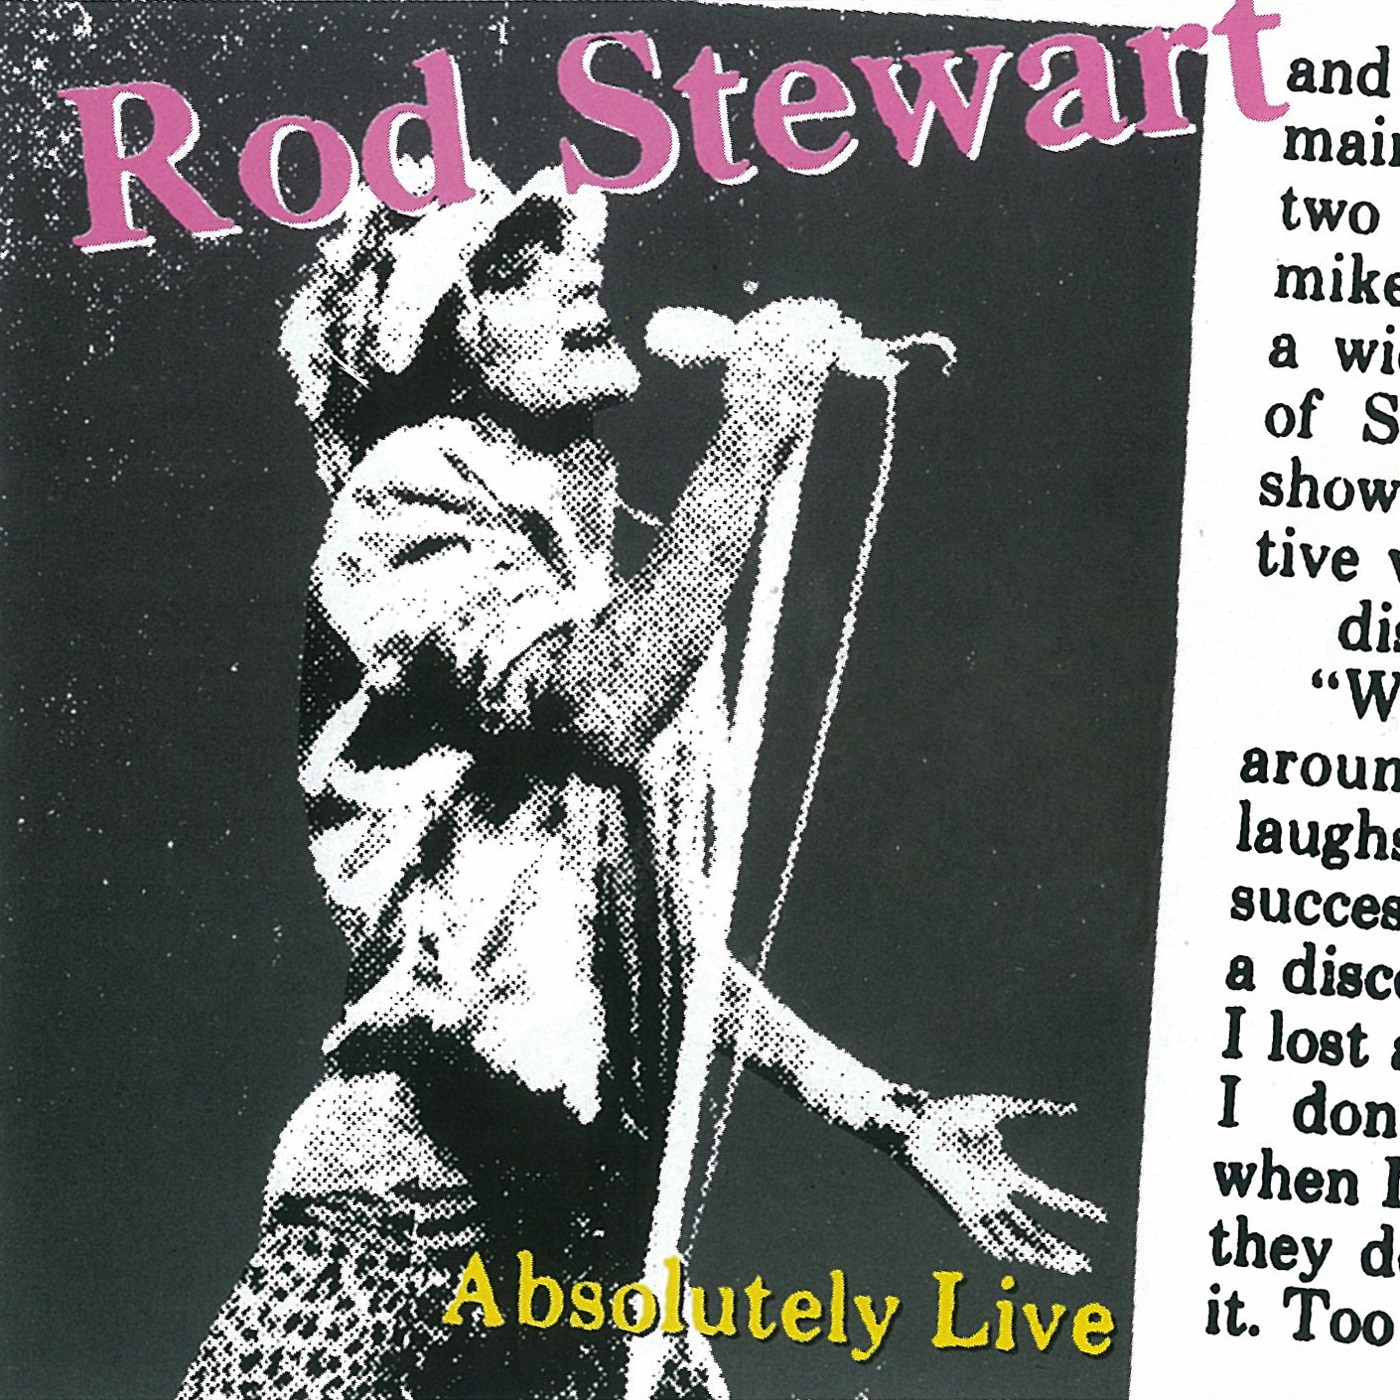 Absolutely Live by Rod Stewart